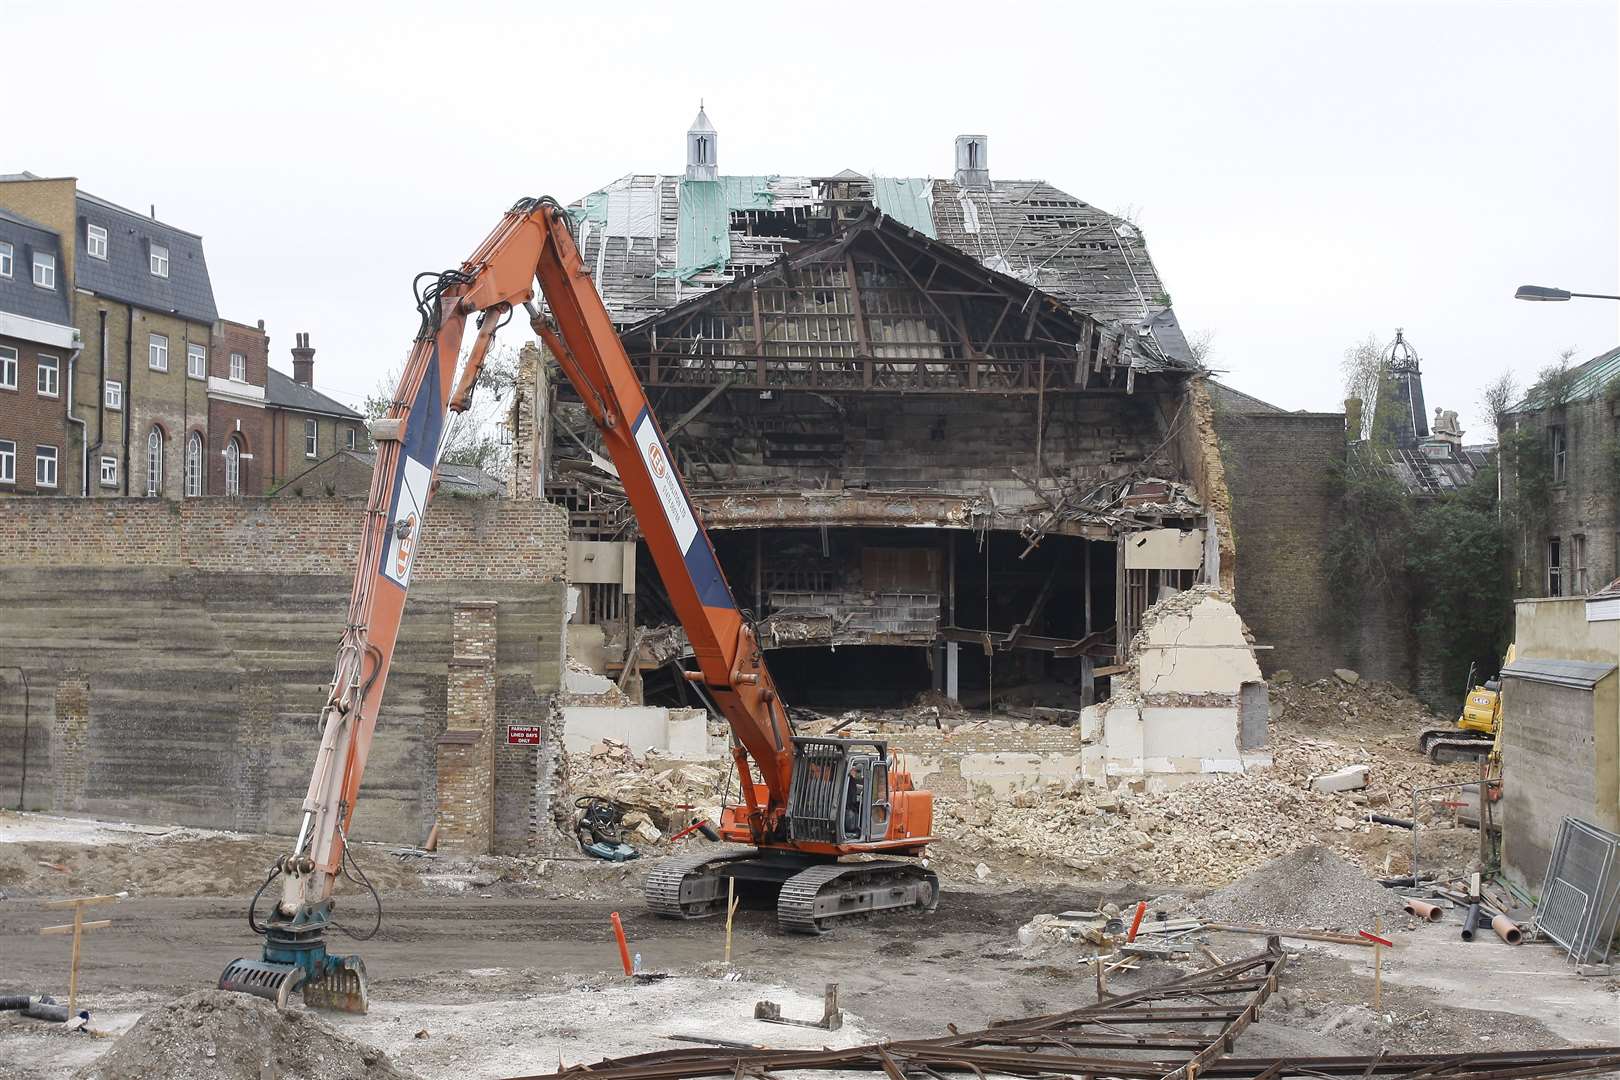 The auditorium at the Theatre Royal was demolished in 2009. A new development of apartments called Theatre Quarter has been built in its place